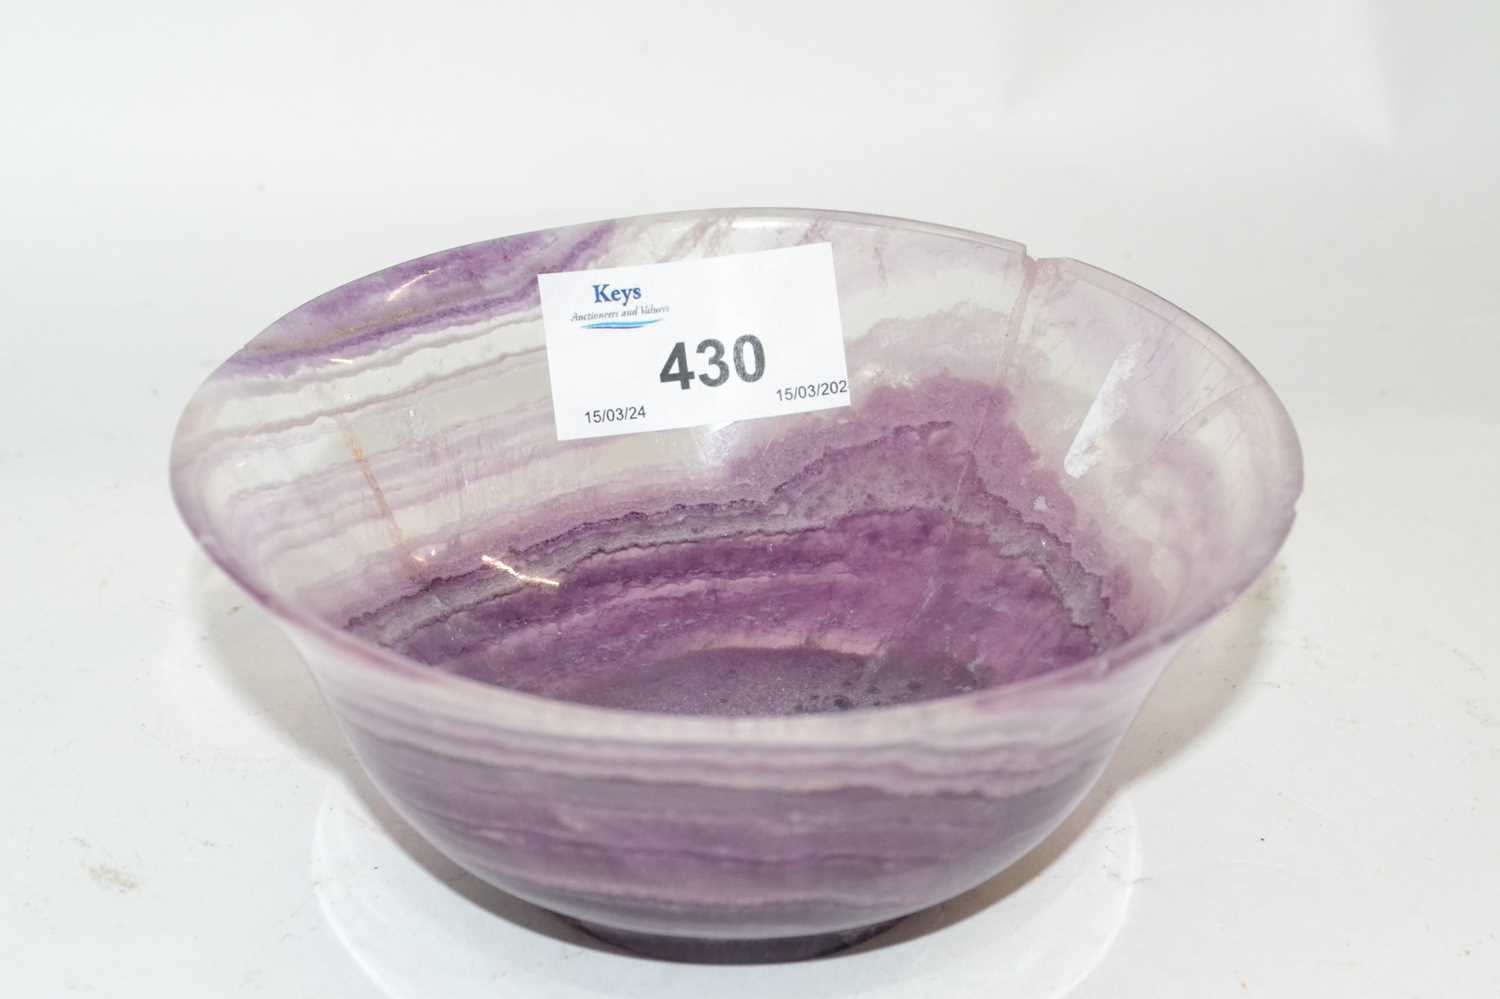 A flourite bowl with polished finish in Blue John style